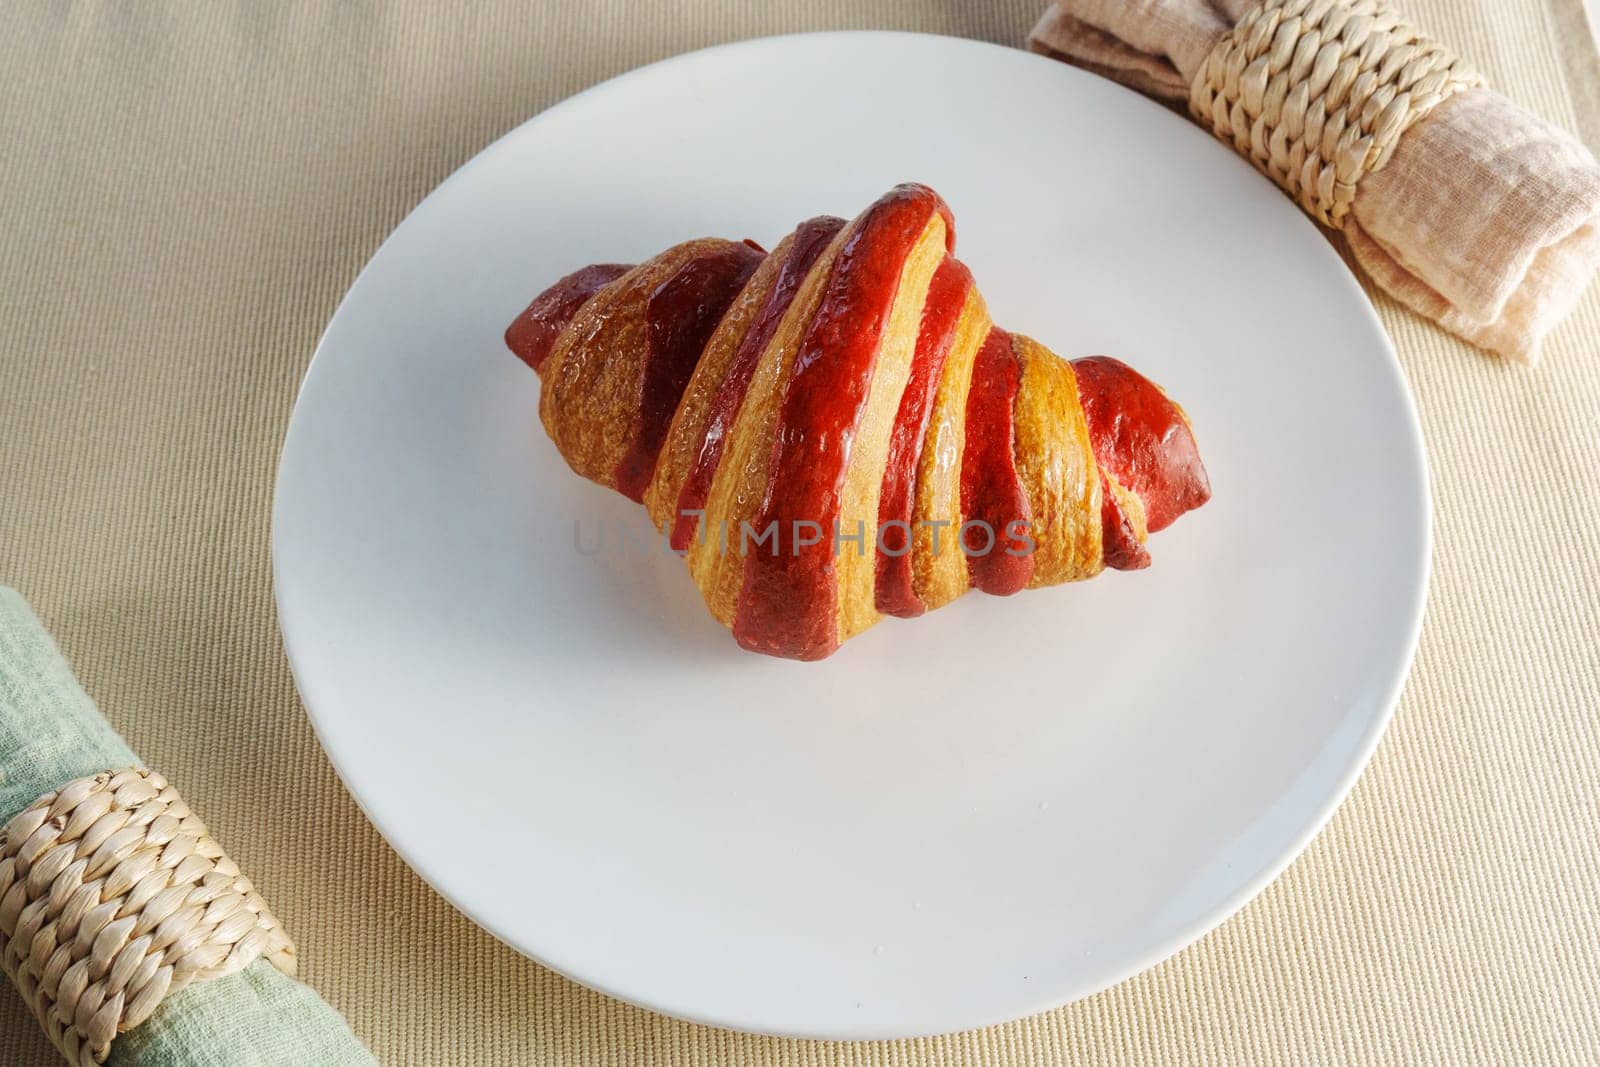 Croissant vibrant piece of fruit, a succulent crimson strawberry, creating an ethereal and evocative composition.